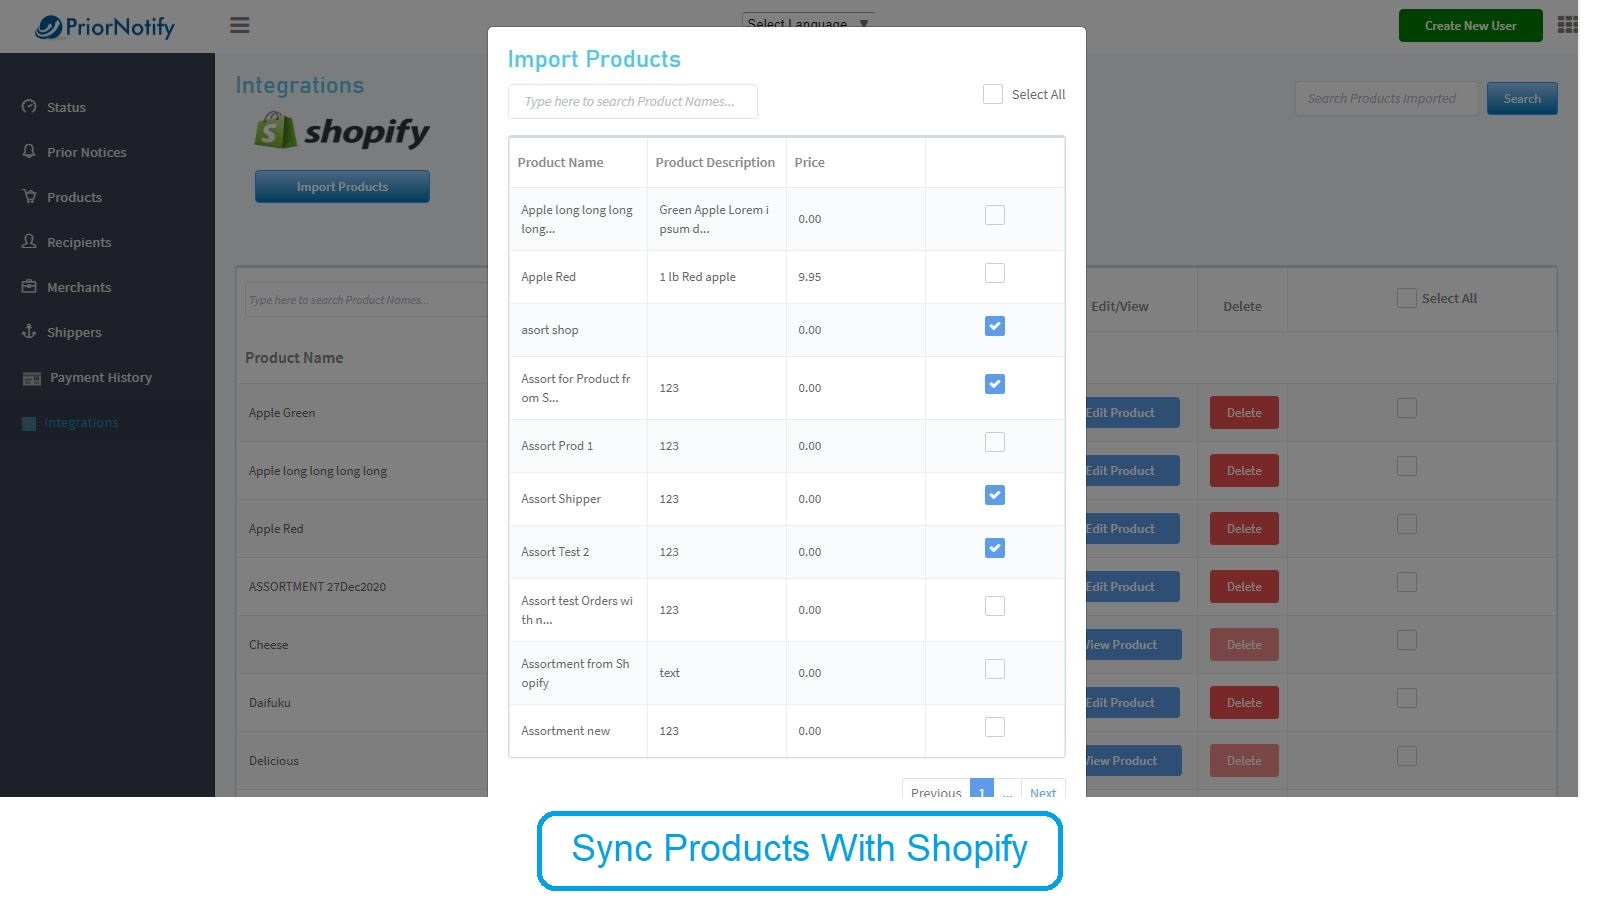 Sync your products with Shopify